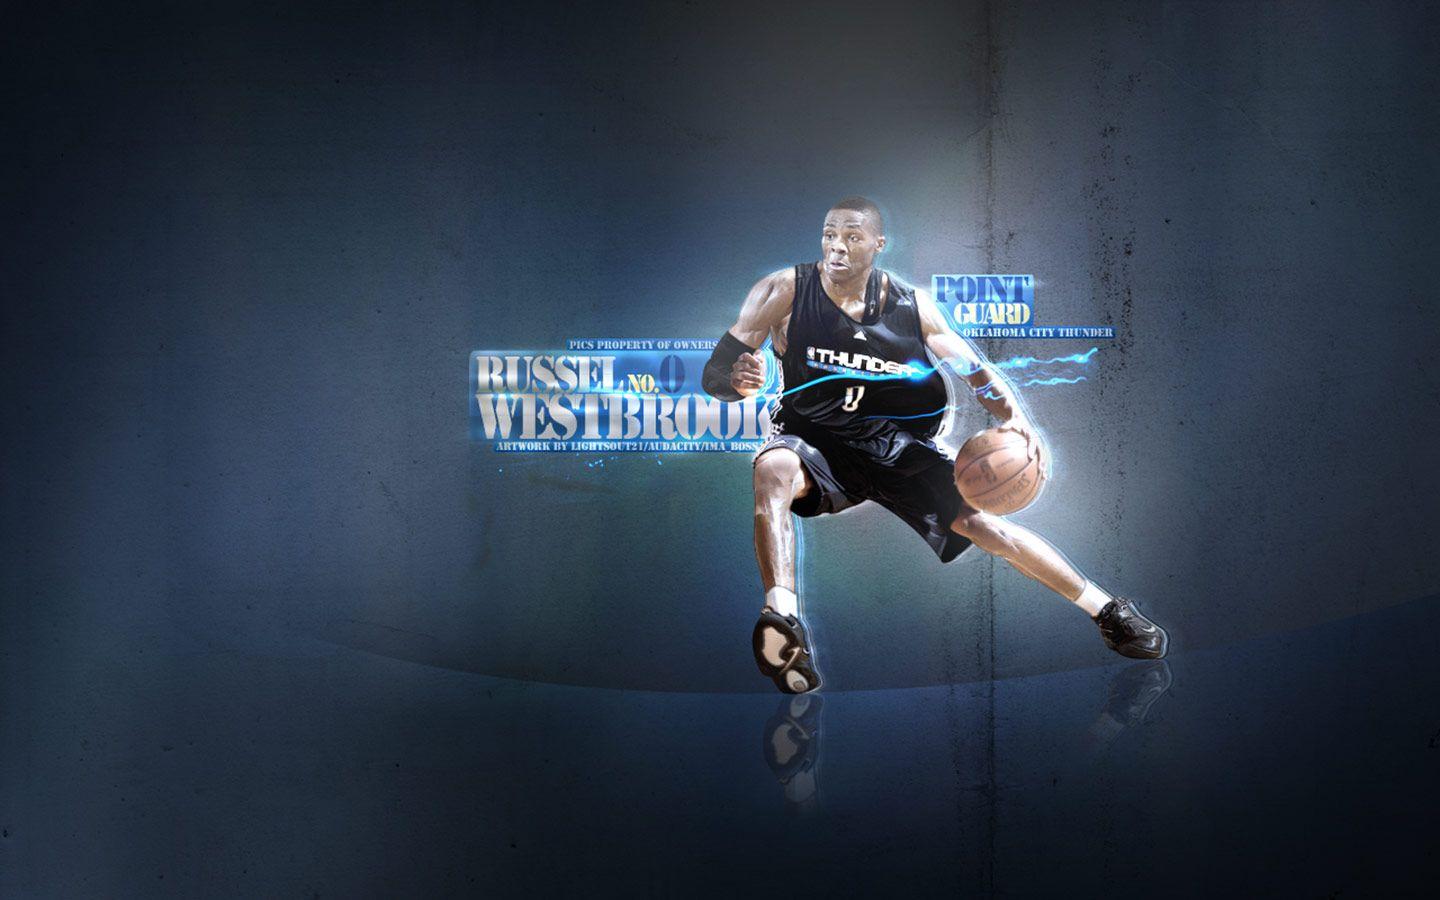 Russell Westbrook 2017 Wallpapers - Wallpaper Cave